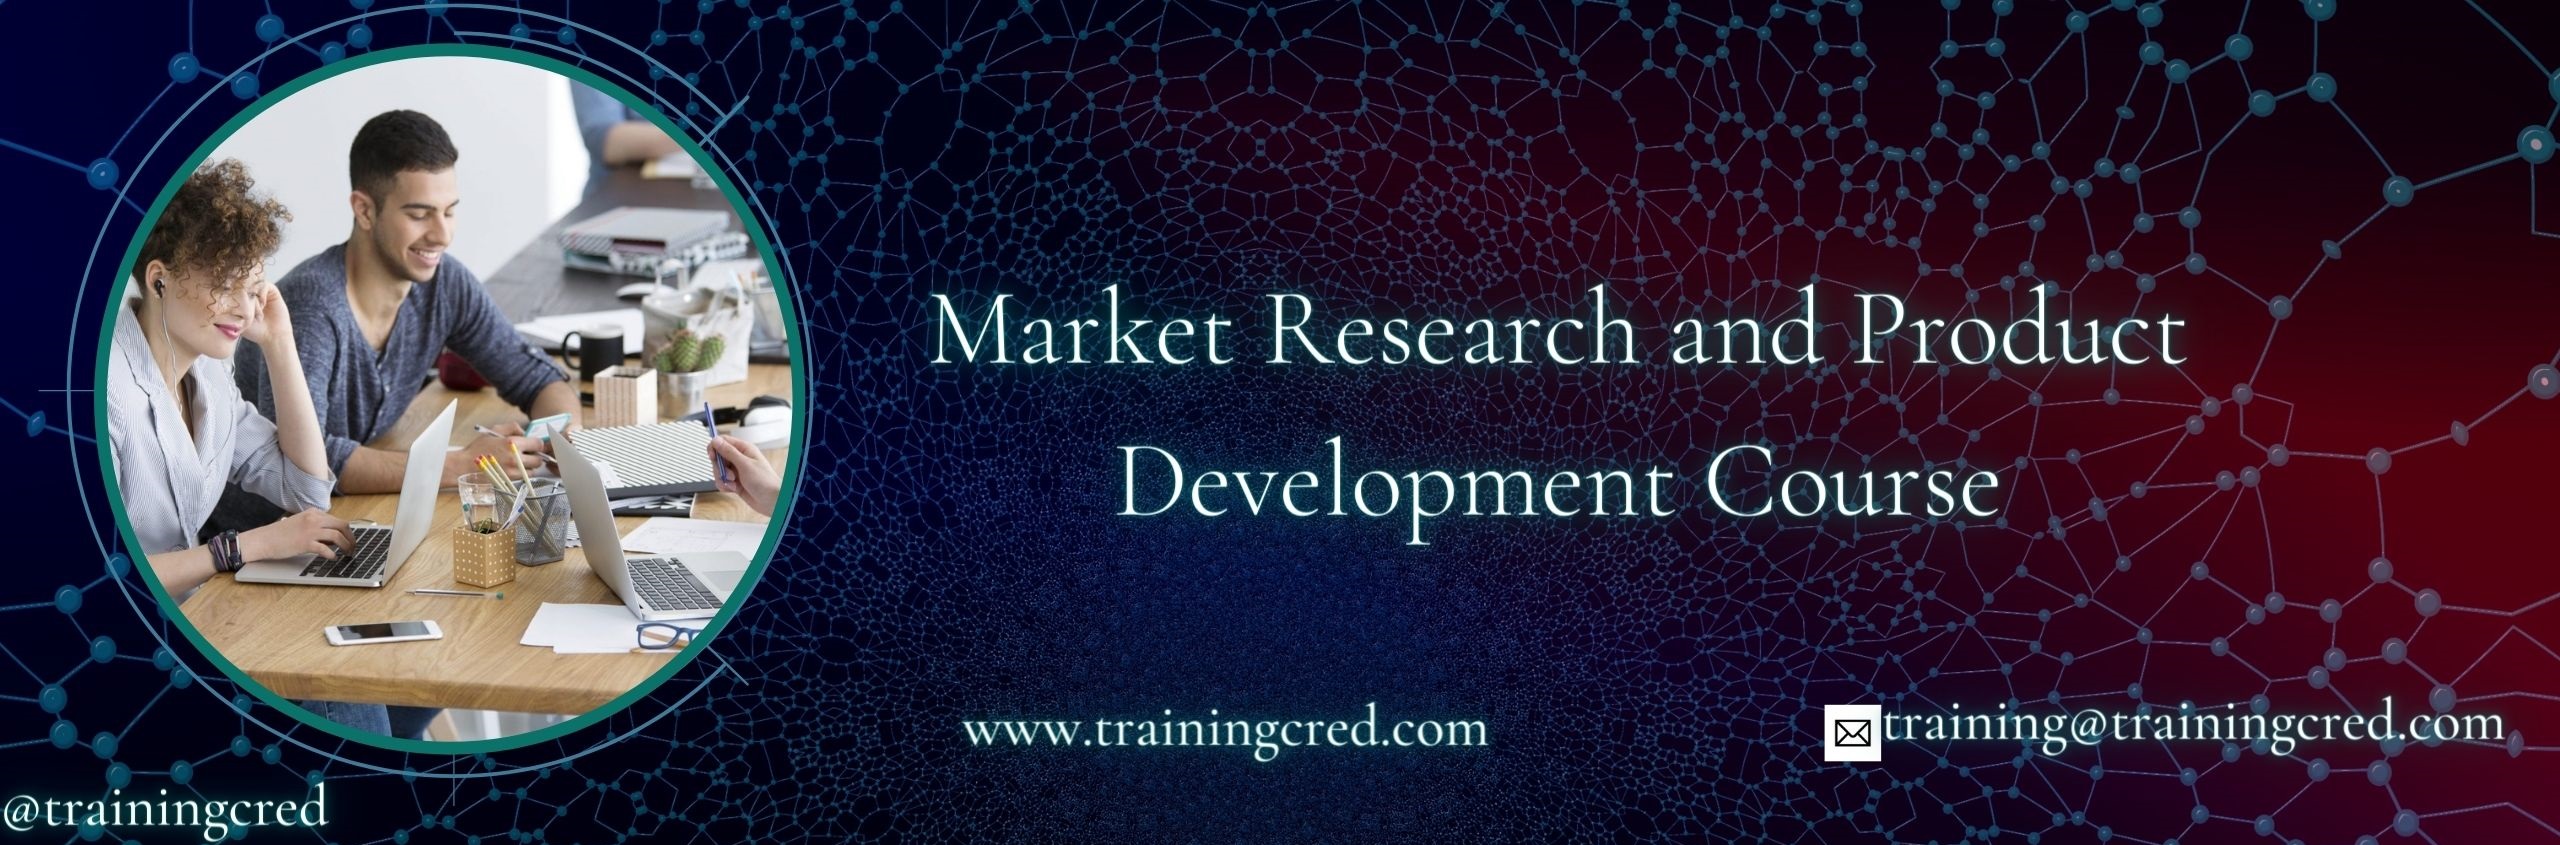 Market Research and Product Development Training